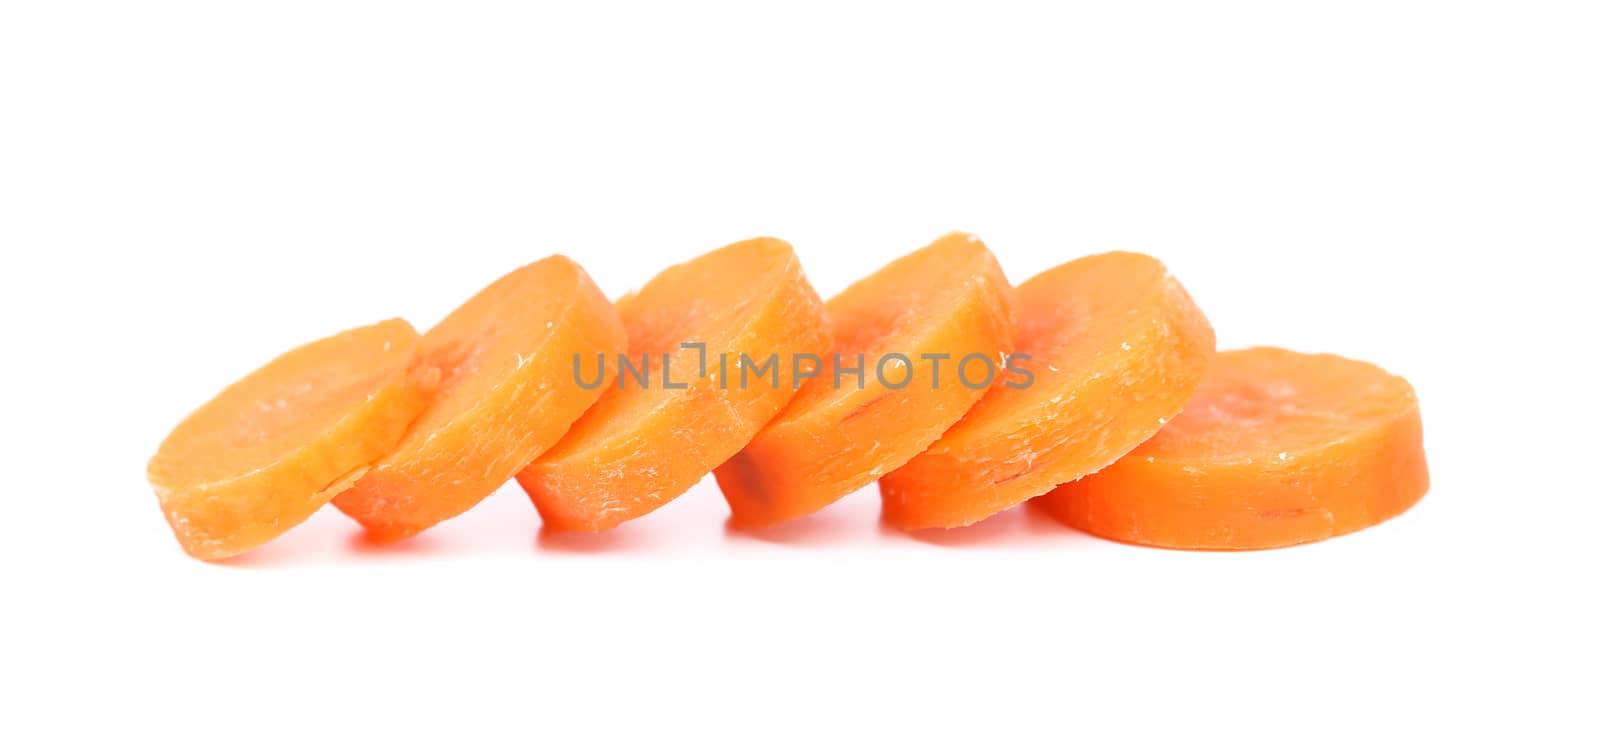 Raw carrot slices on a white background by indigolotos